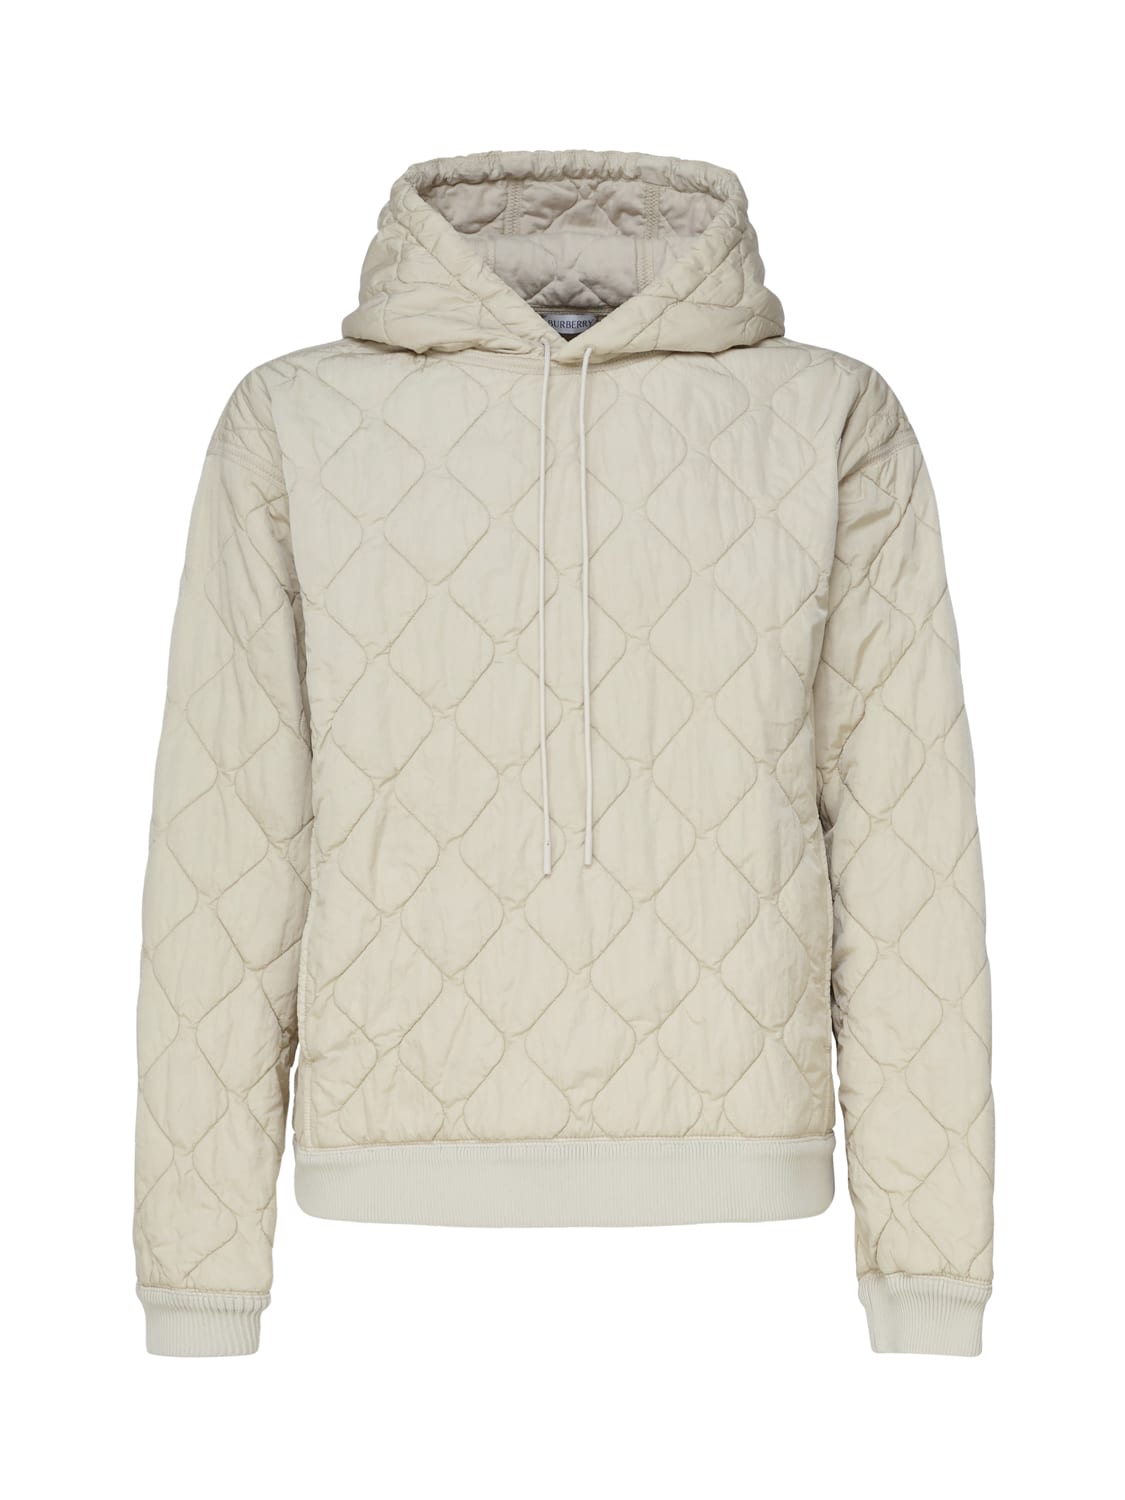 Quilted Sweatshirt With Hood And Drawstring